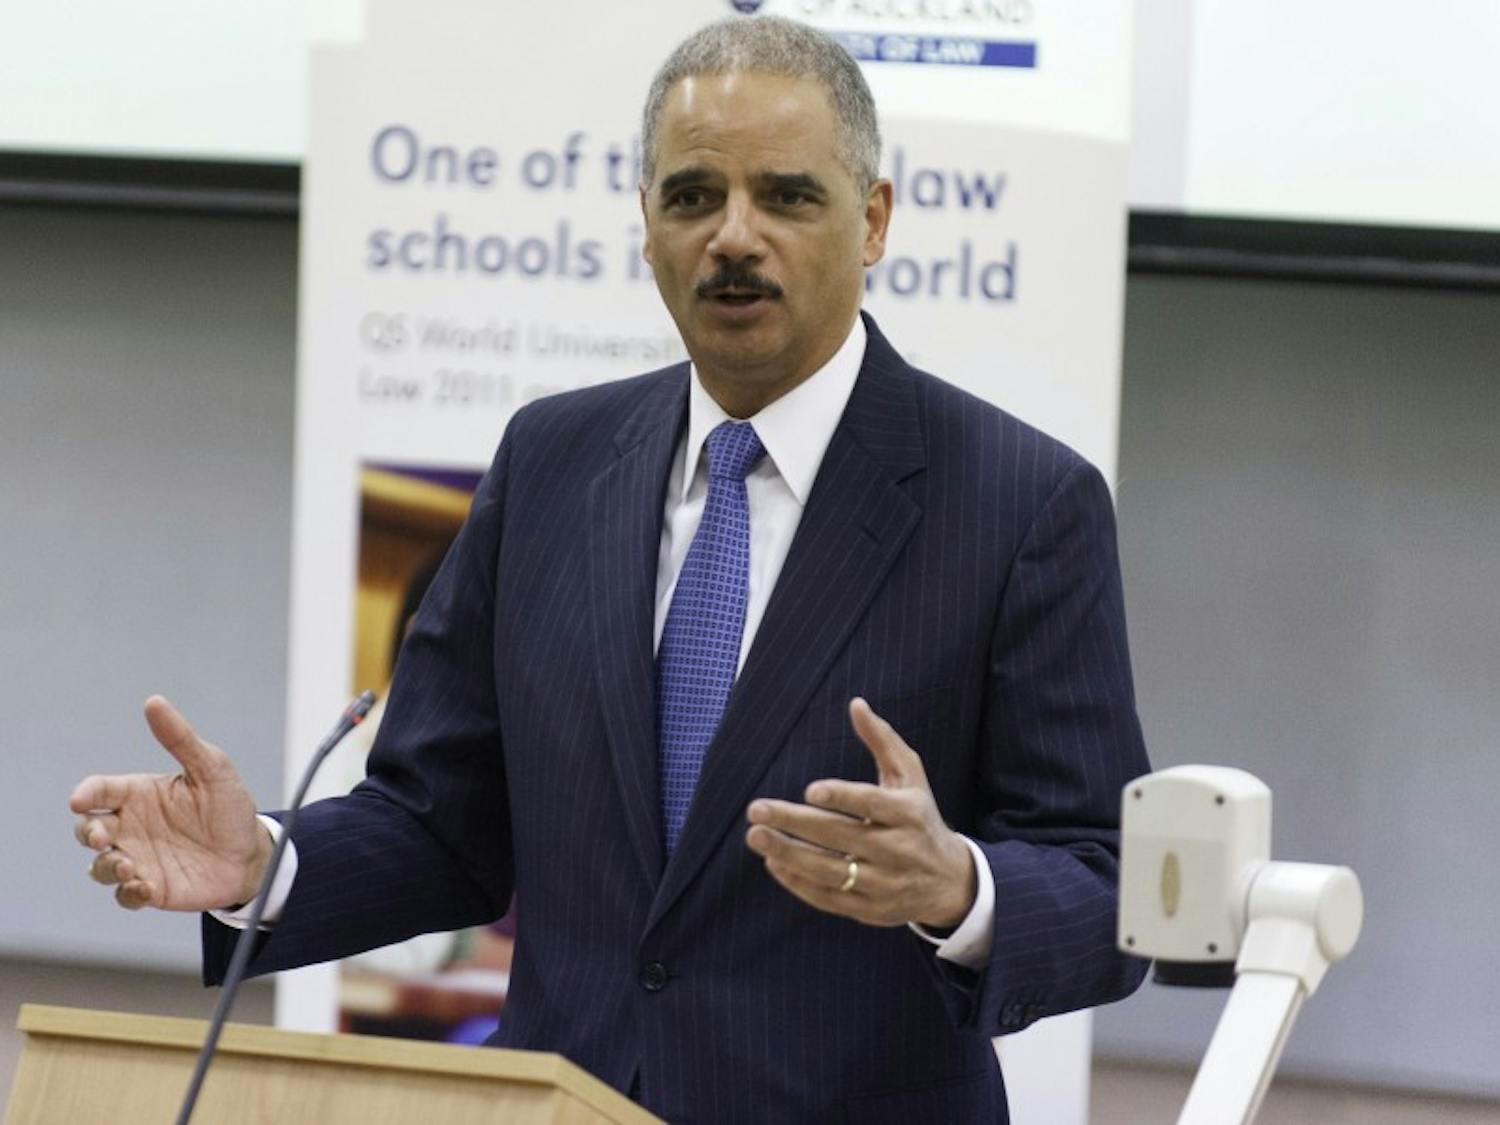 Former U.S. Attorney General Eric Holder visited campus Friday to discuss the importance of redistricting reform, political participation and his legal battle with Gov. Scott Walker.